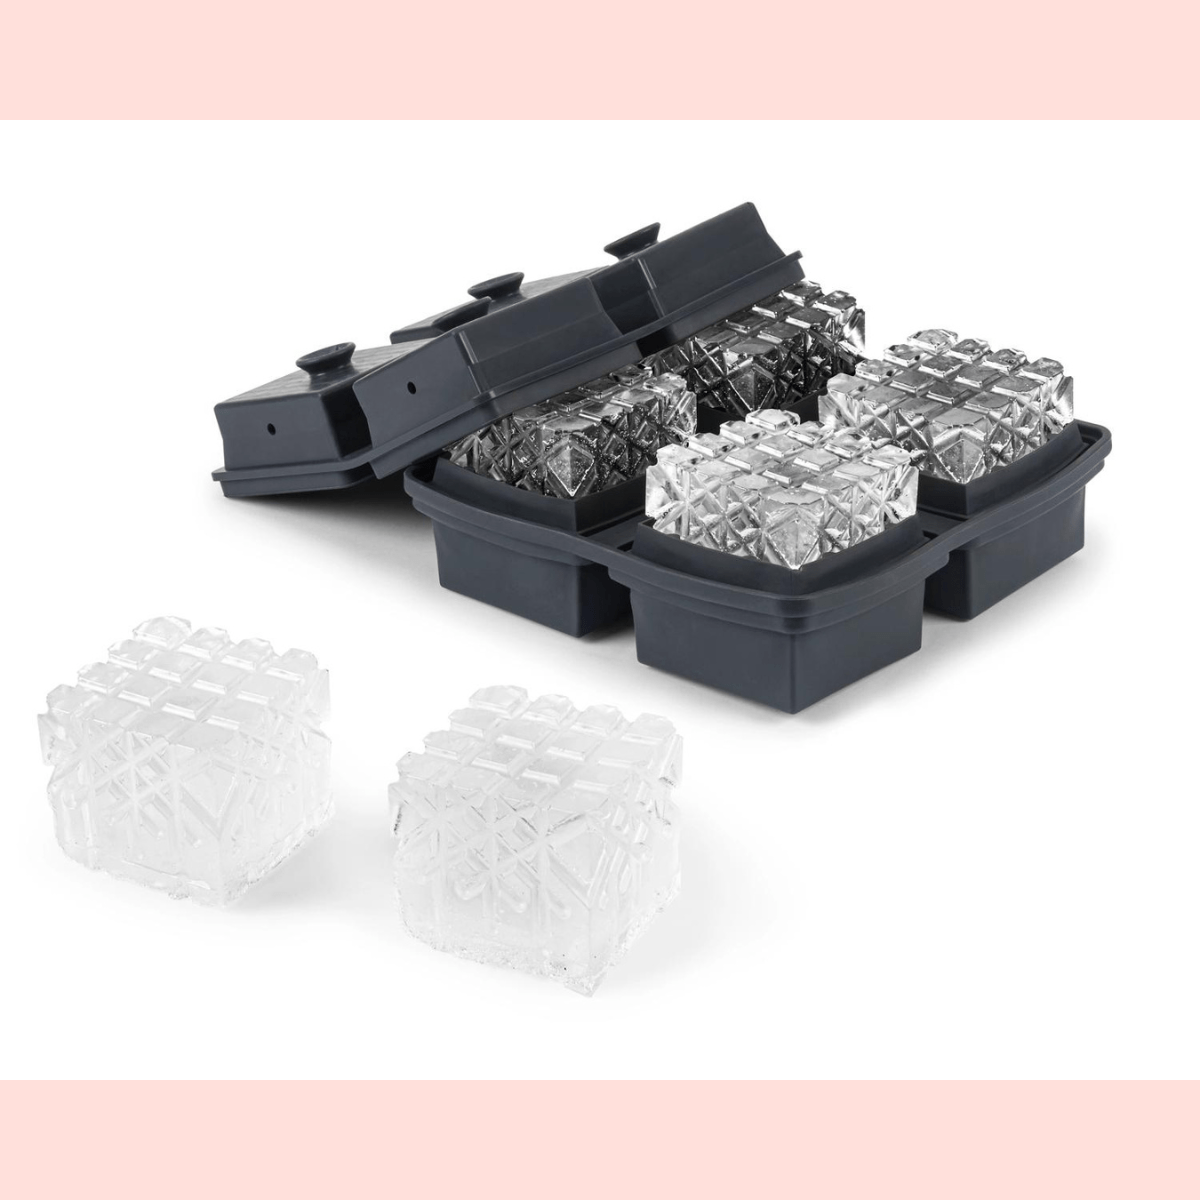 Botanicals Ice Design Tray for Clear Ice Cocktails and Whiskey